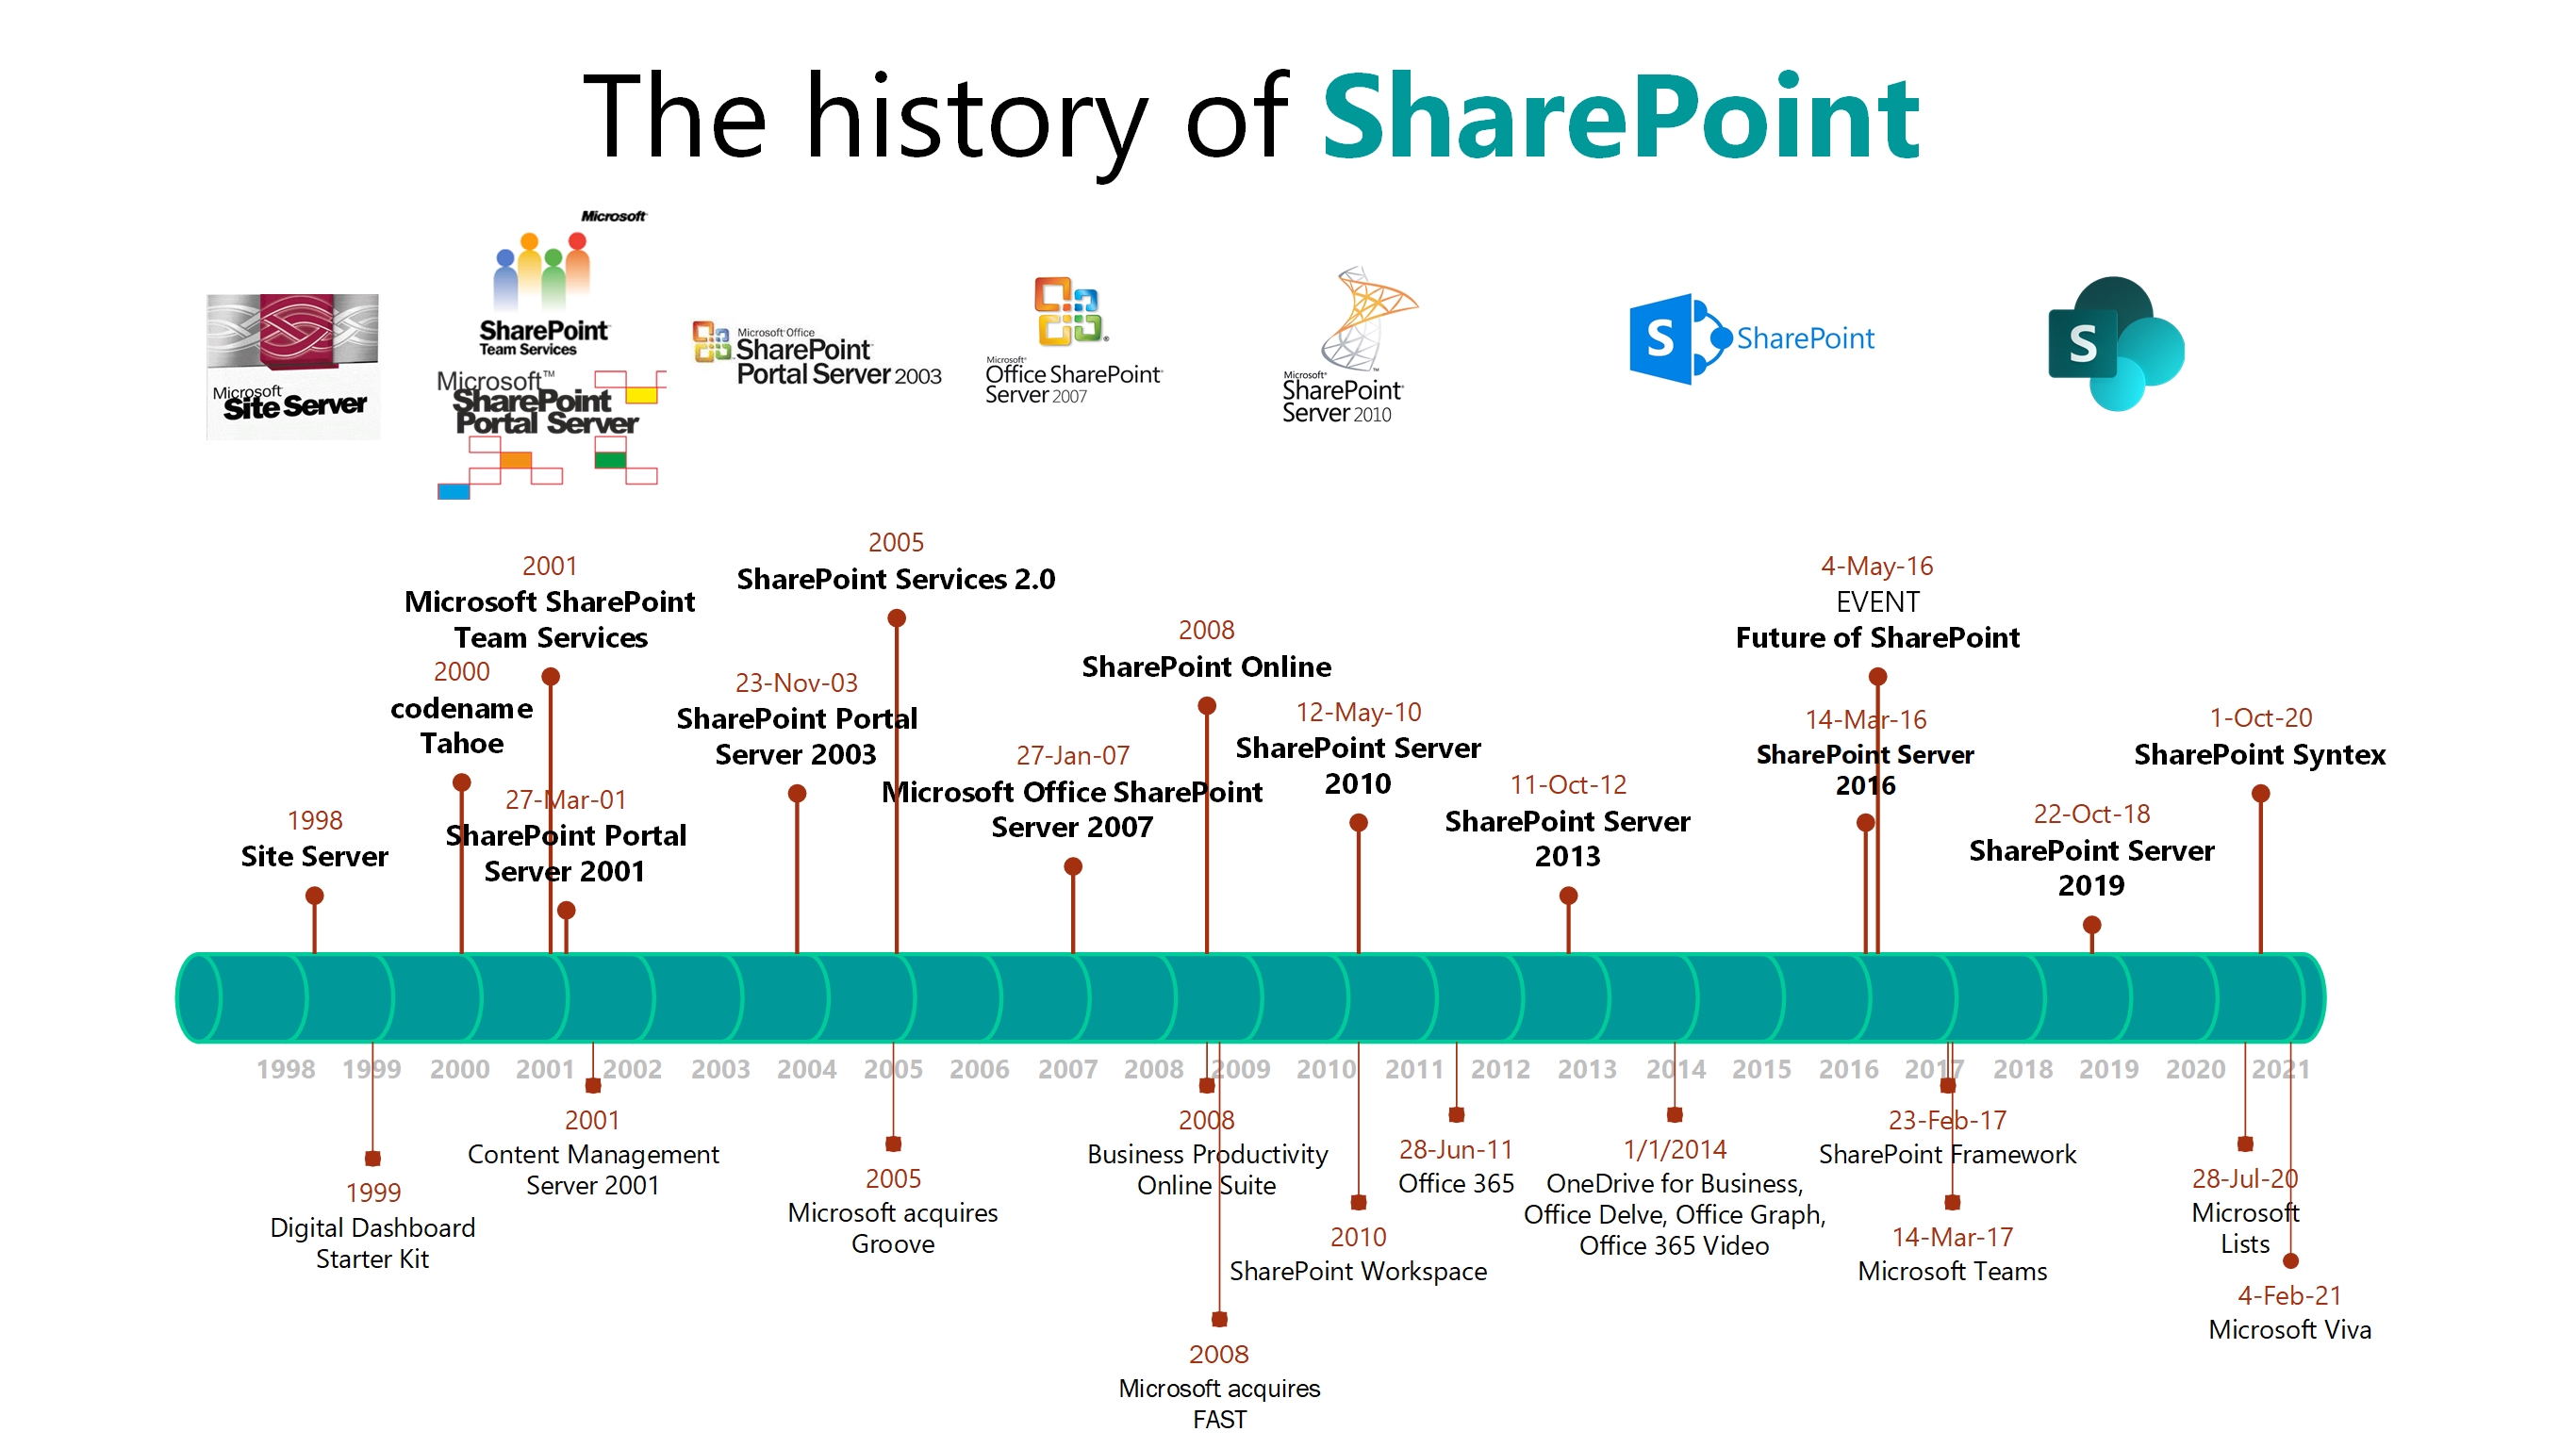 Image credit to: @SharePoint